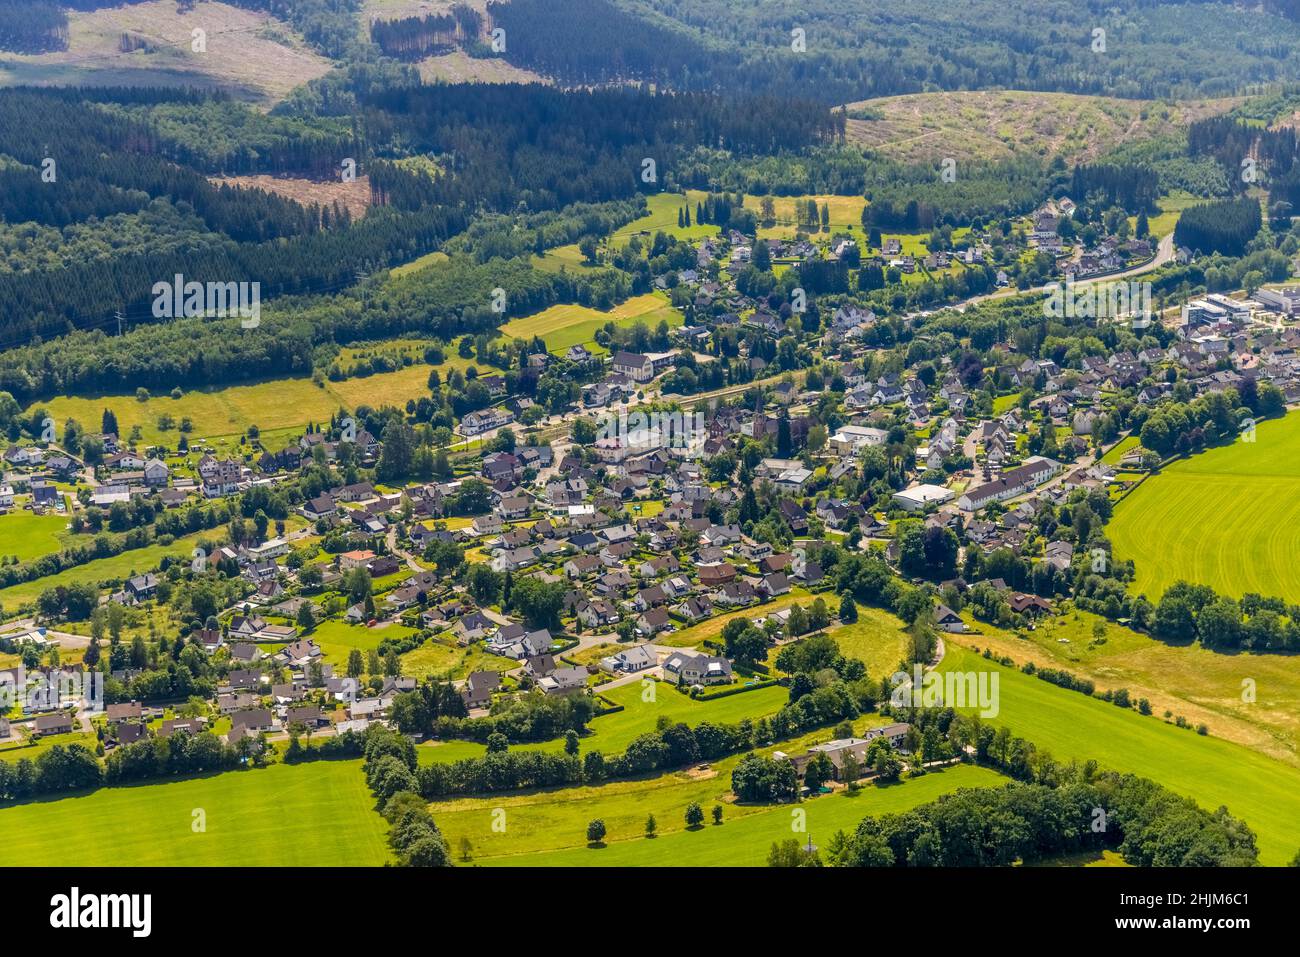 Aerial view, forest area with forest damage, local view Welschen-Ennest, Kirchhundem, Sauerland, North Rhine-Westphalia, Germany, tree dieback, bark b Stock Photo